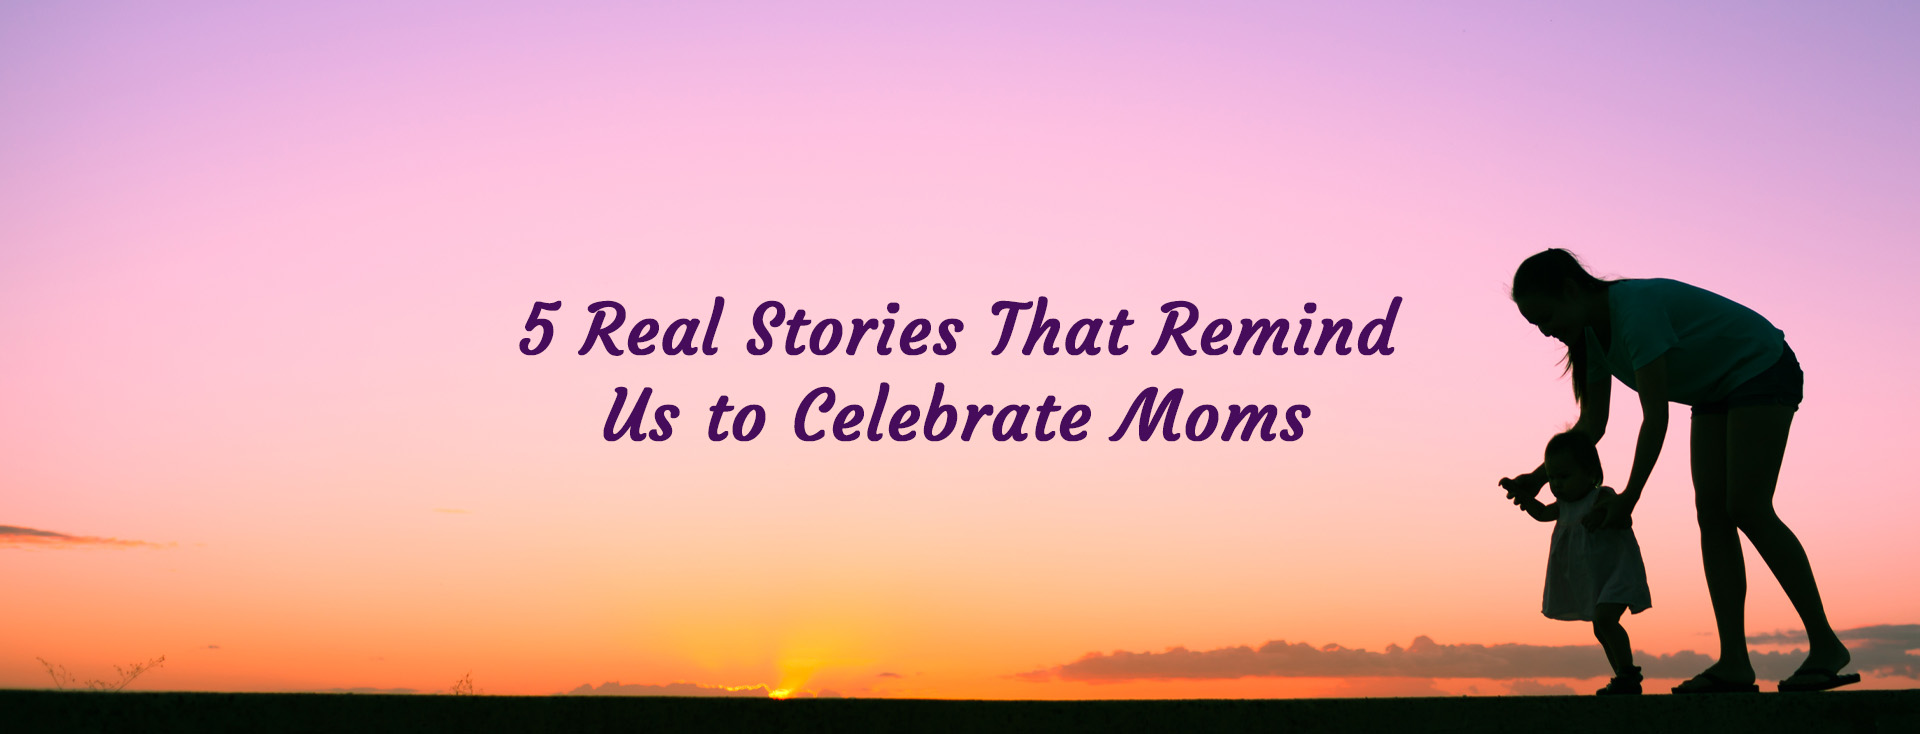 5 Real Stories that Remind us To Celebrate Moms